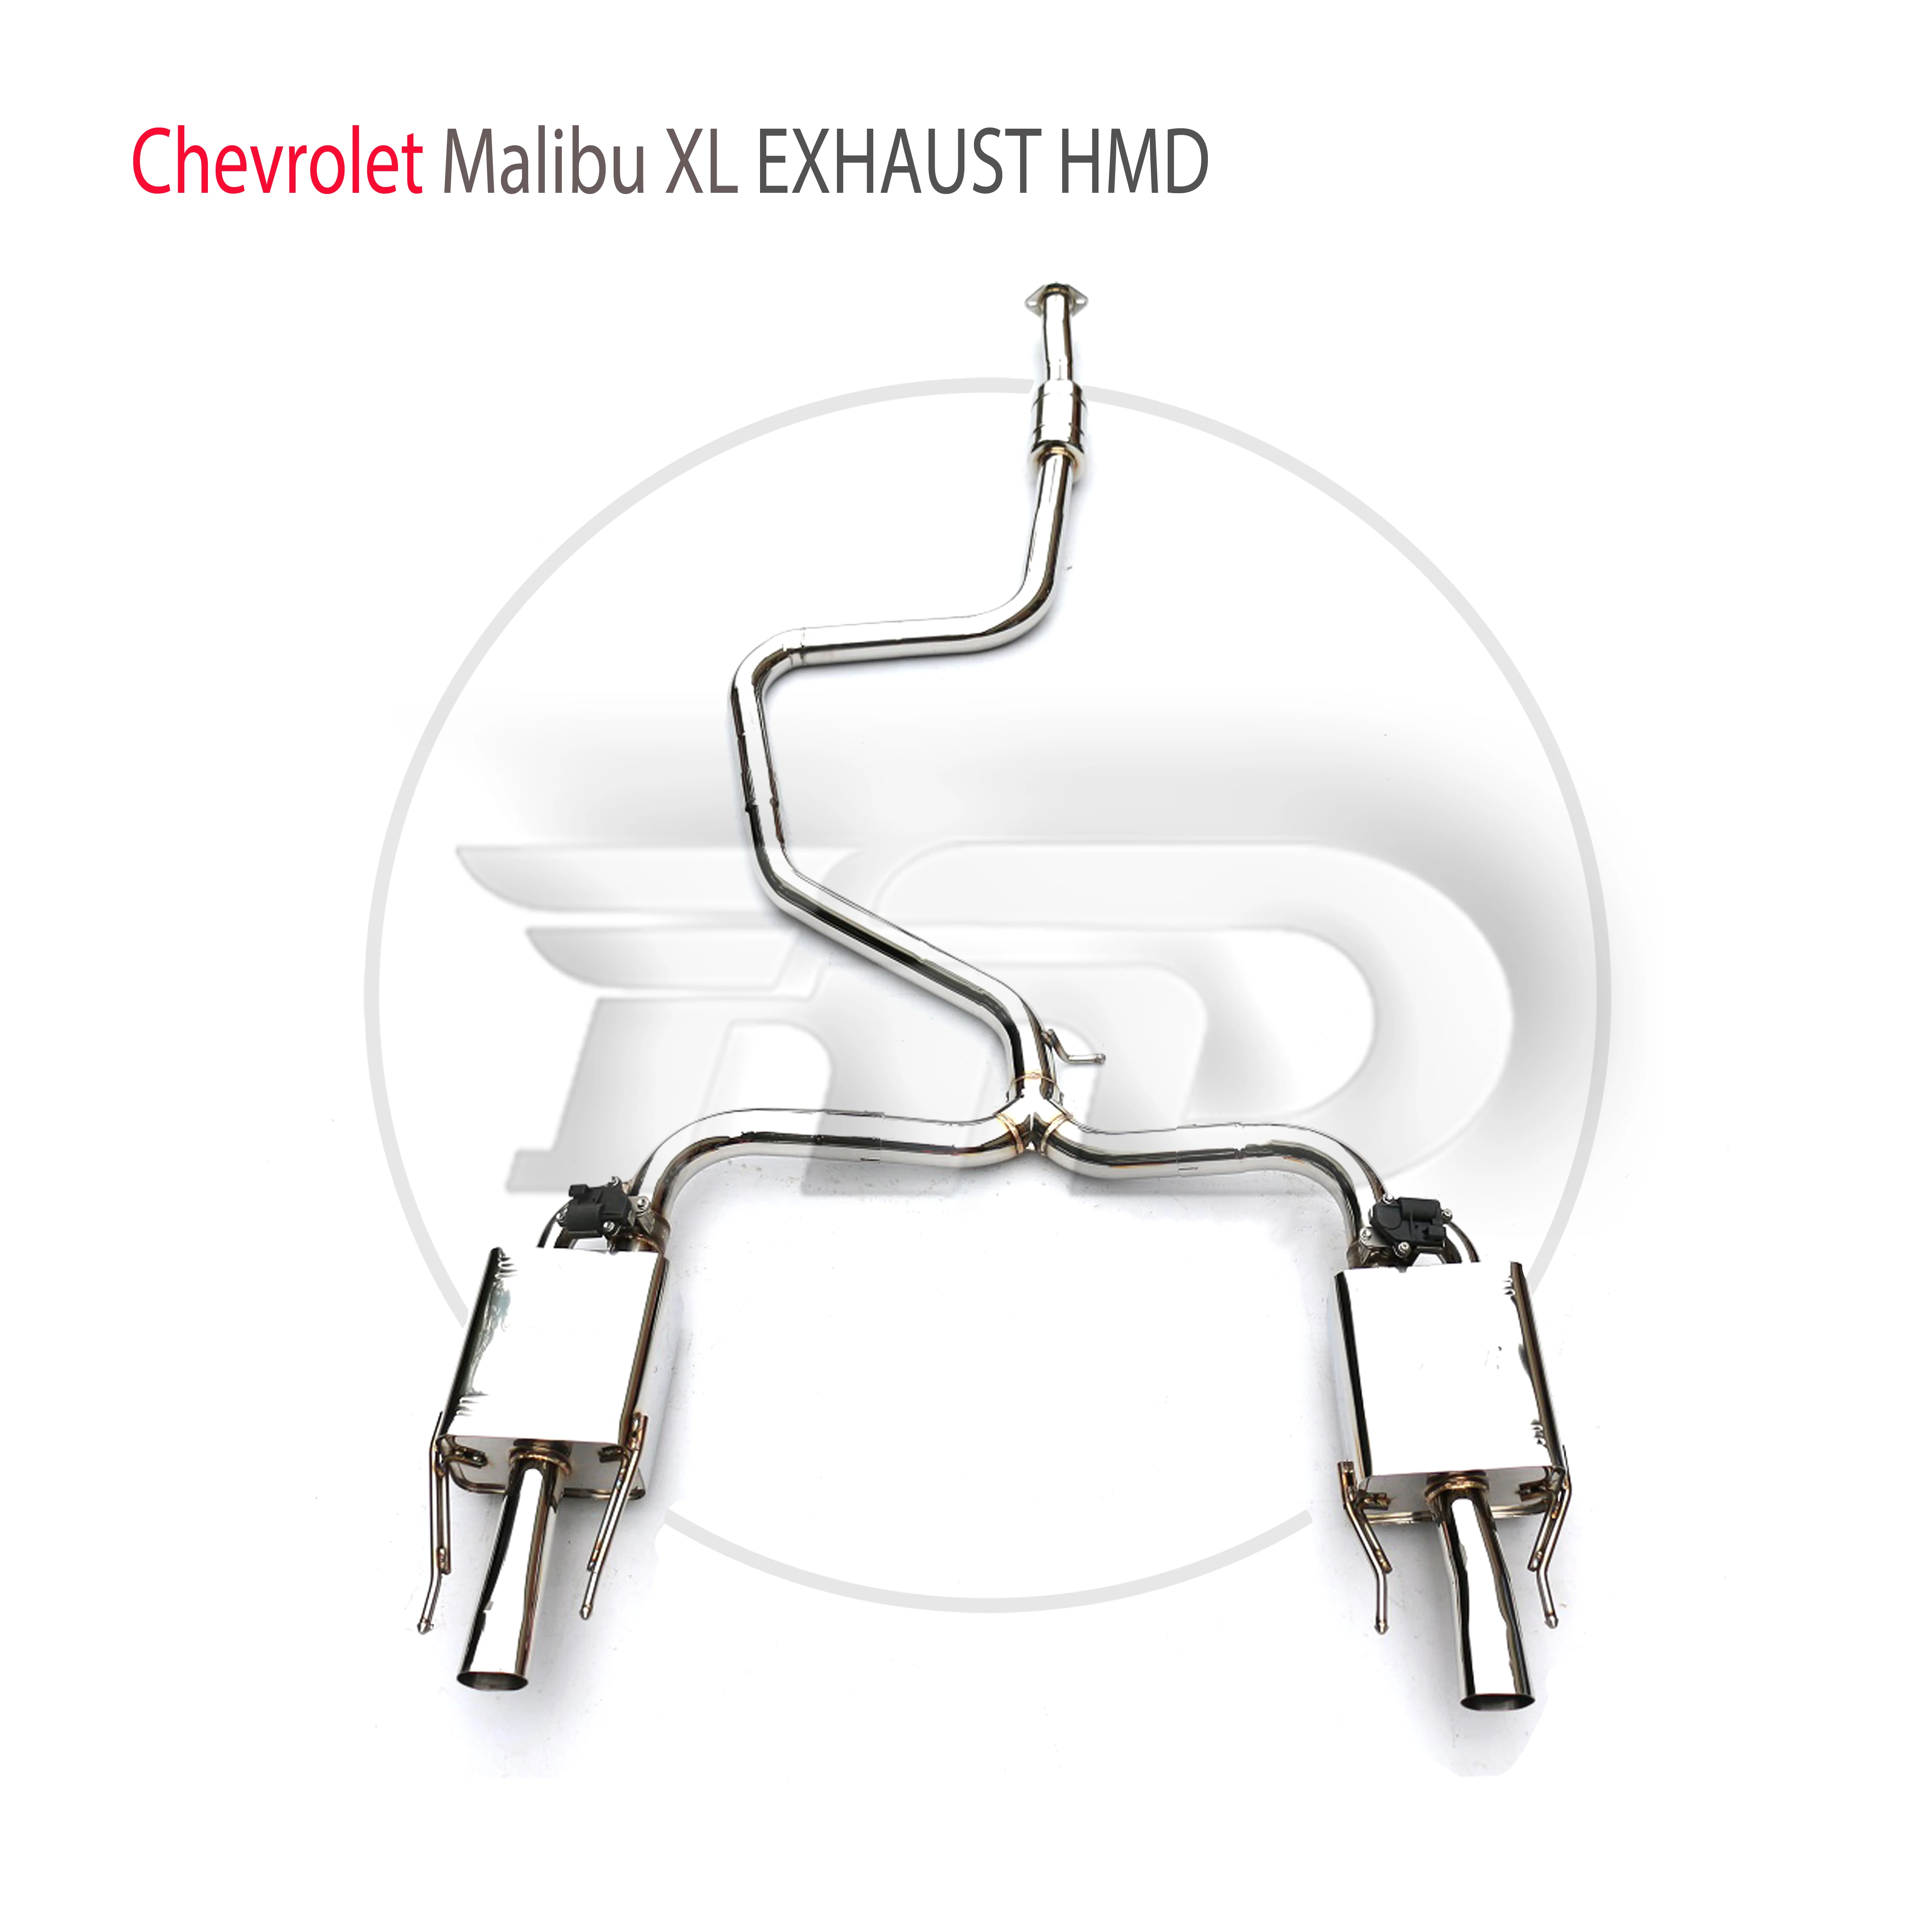 

HMD Stainless Steel Exhaust System Performance Catback is Suitable for Chevrolet Malibu XL Car Valve Muffler